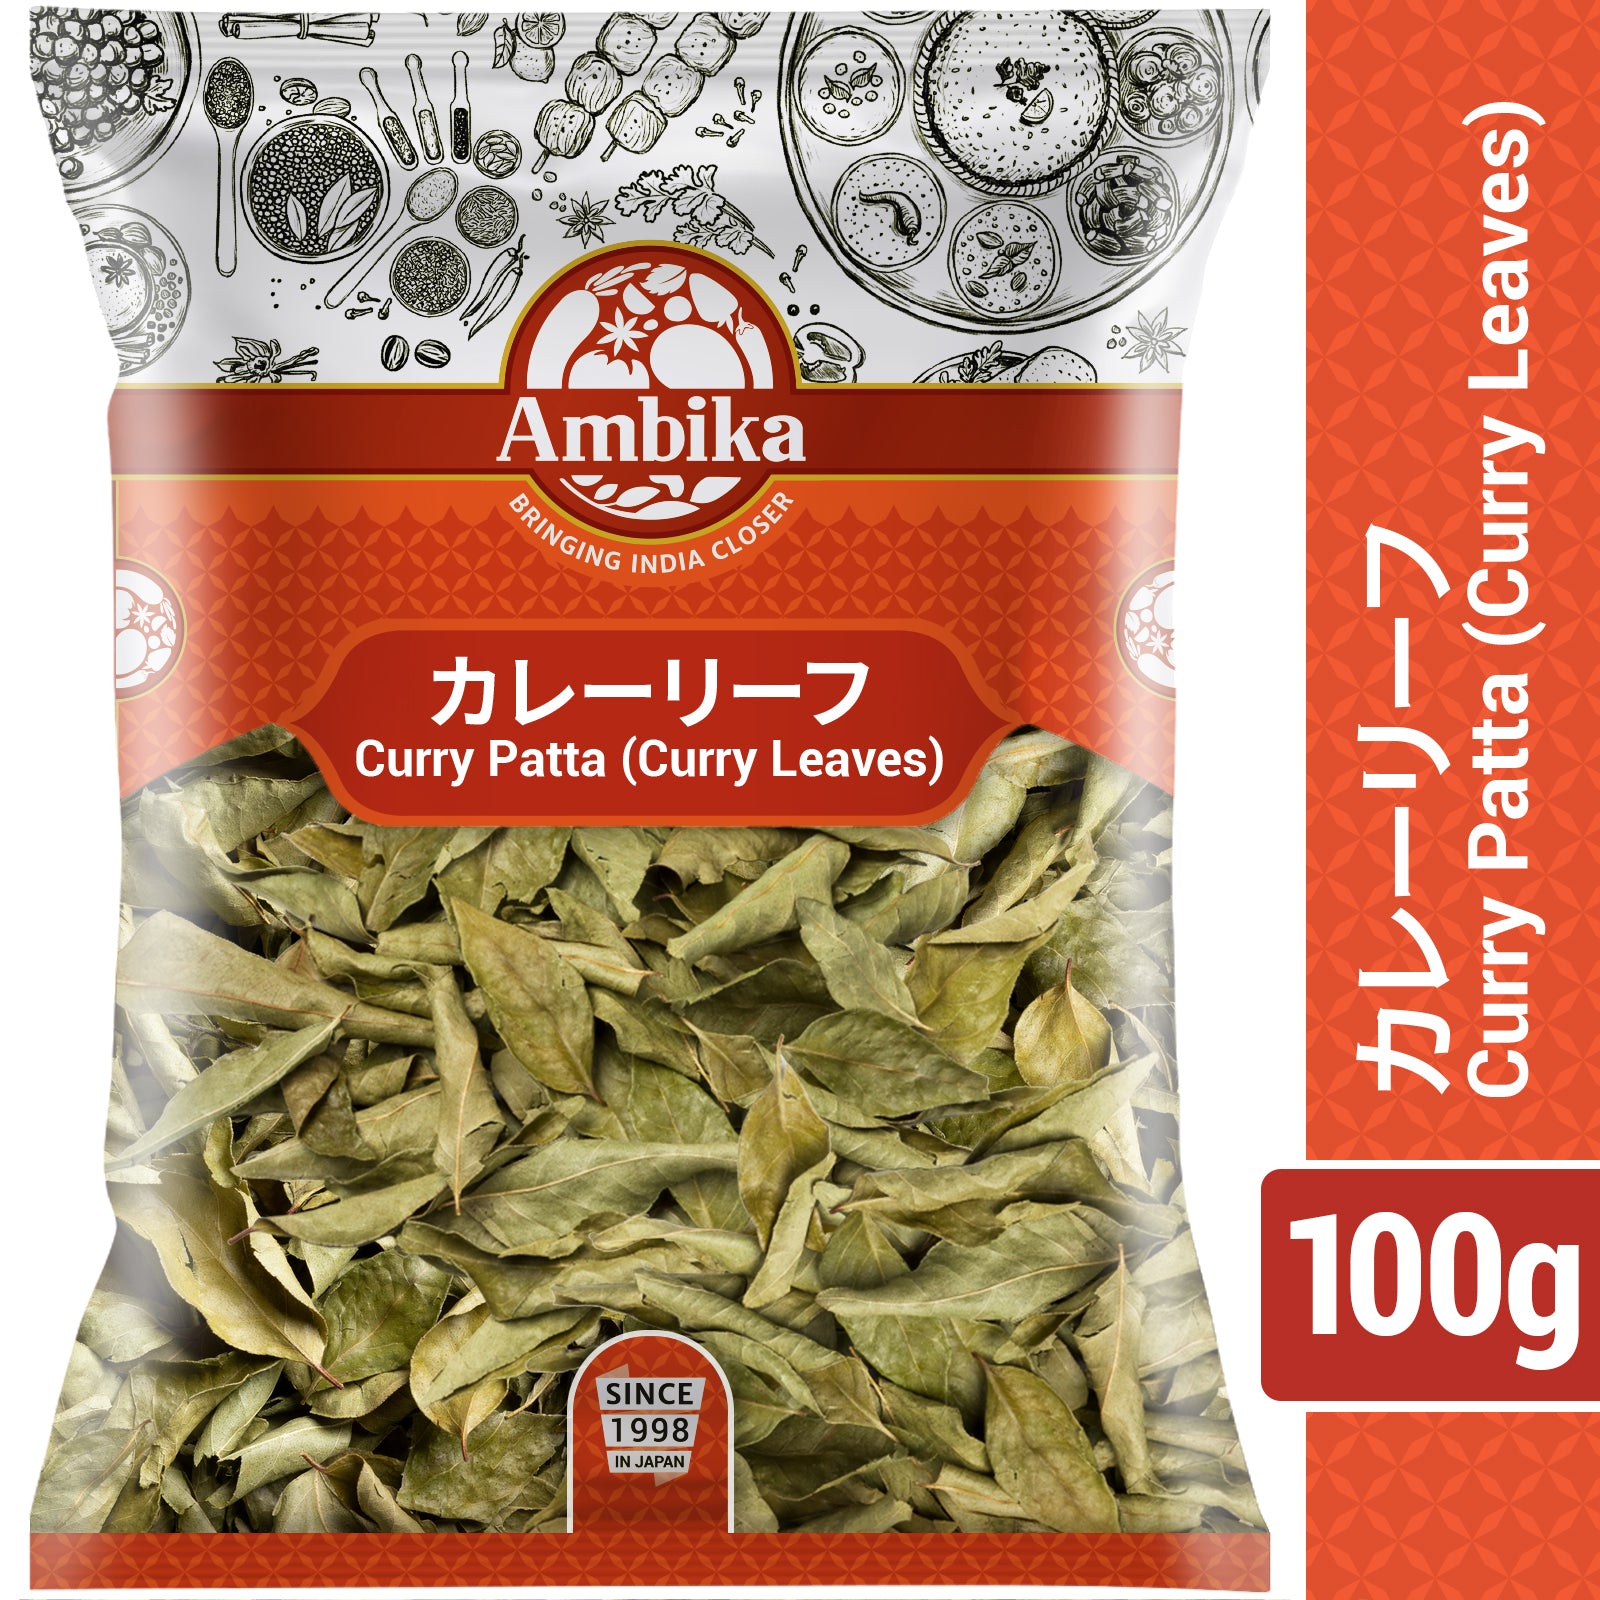 (Ambika) Curry Patta (Curry leaves) 250g